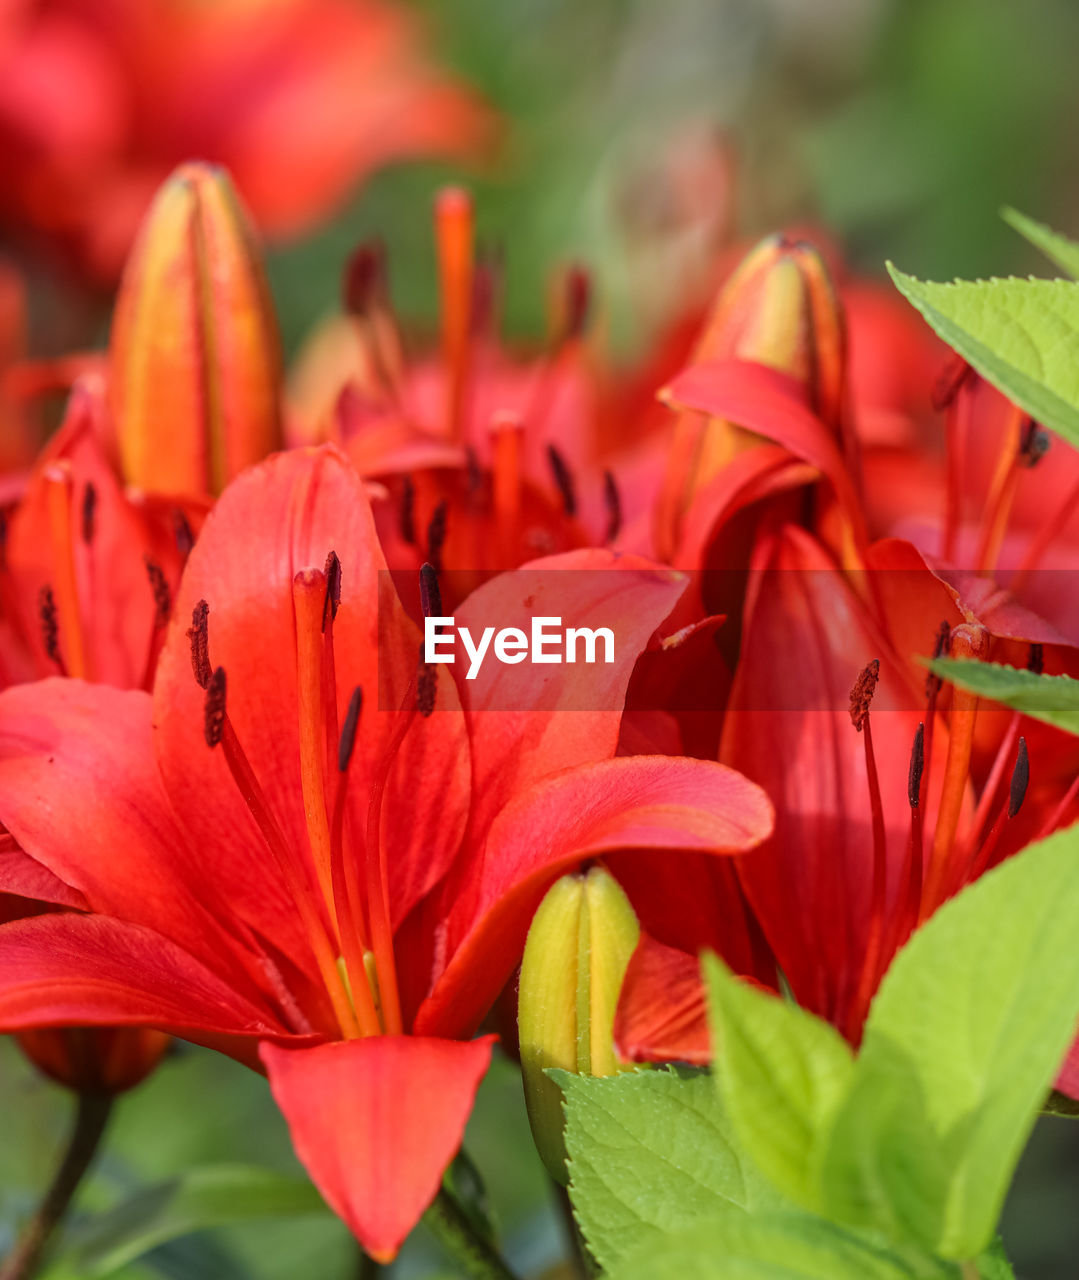 flower, plant, flowering plant, beauty in nature, freshness, petal, close-up, fragility, flower head, inflorescence, red, nature, growth, leaf, plant part, macro photography, lily, no people, vibrant color, springtime, pollen, botany, stamen, focus on foreground, orange color, outdoors, blossom, selective focus, day